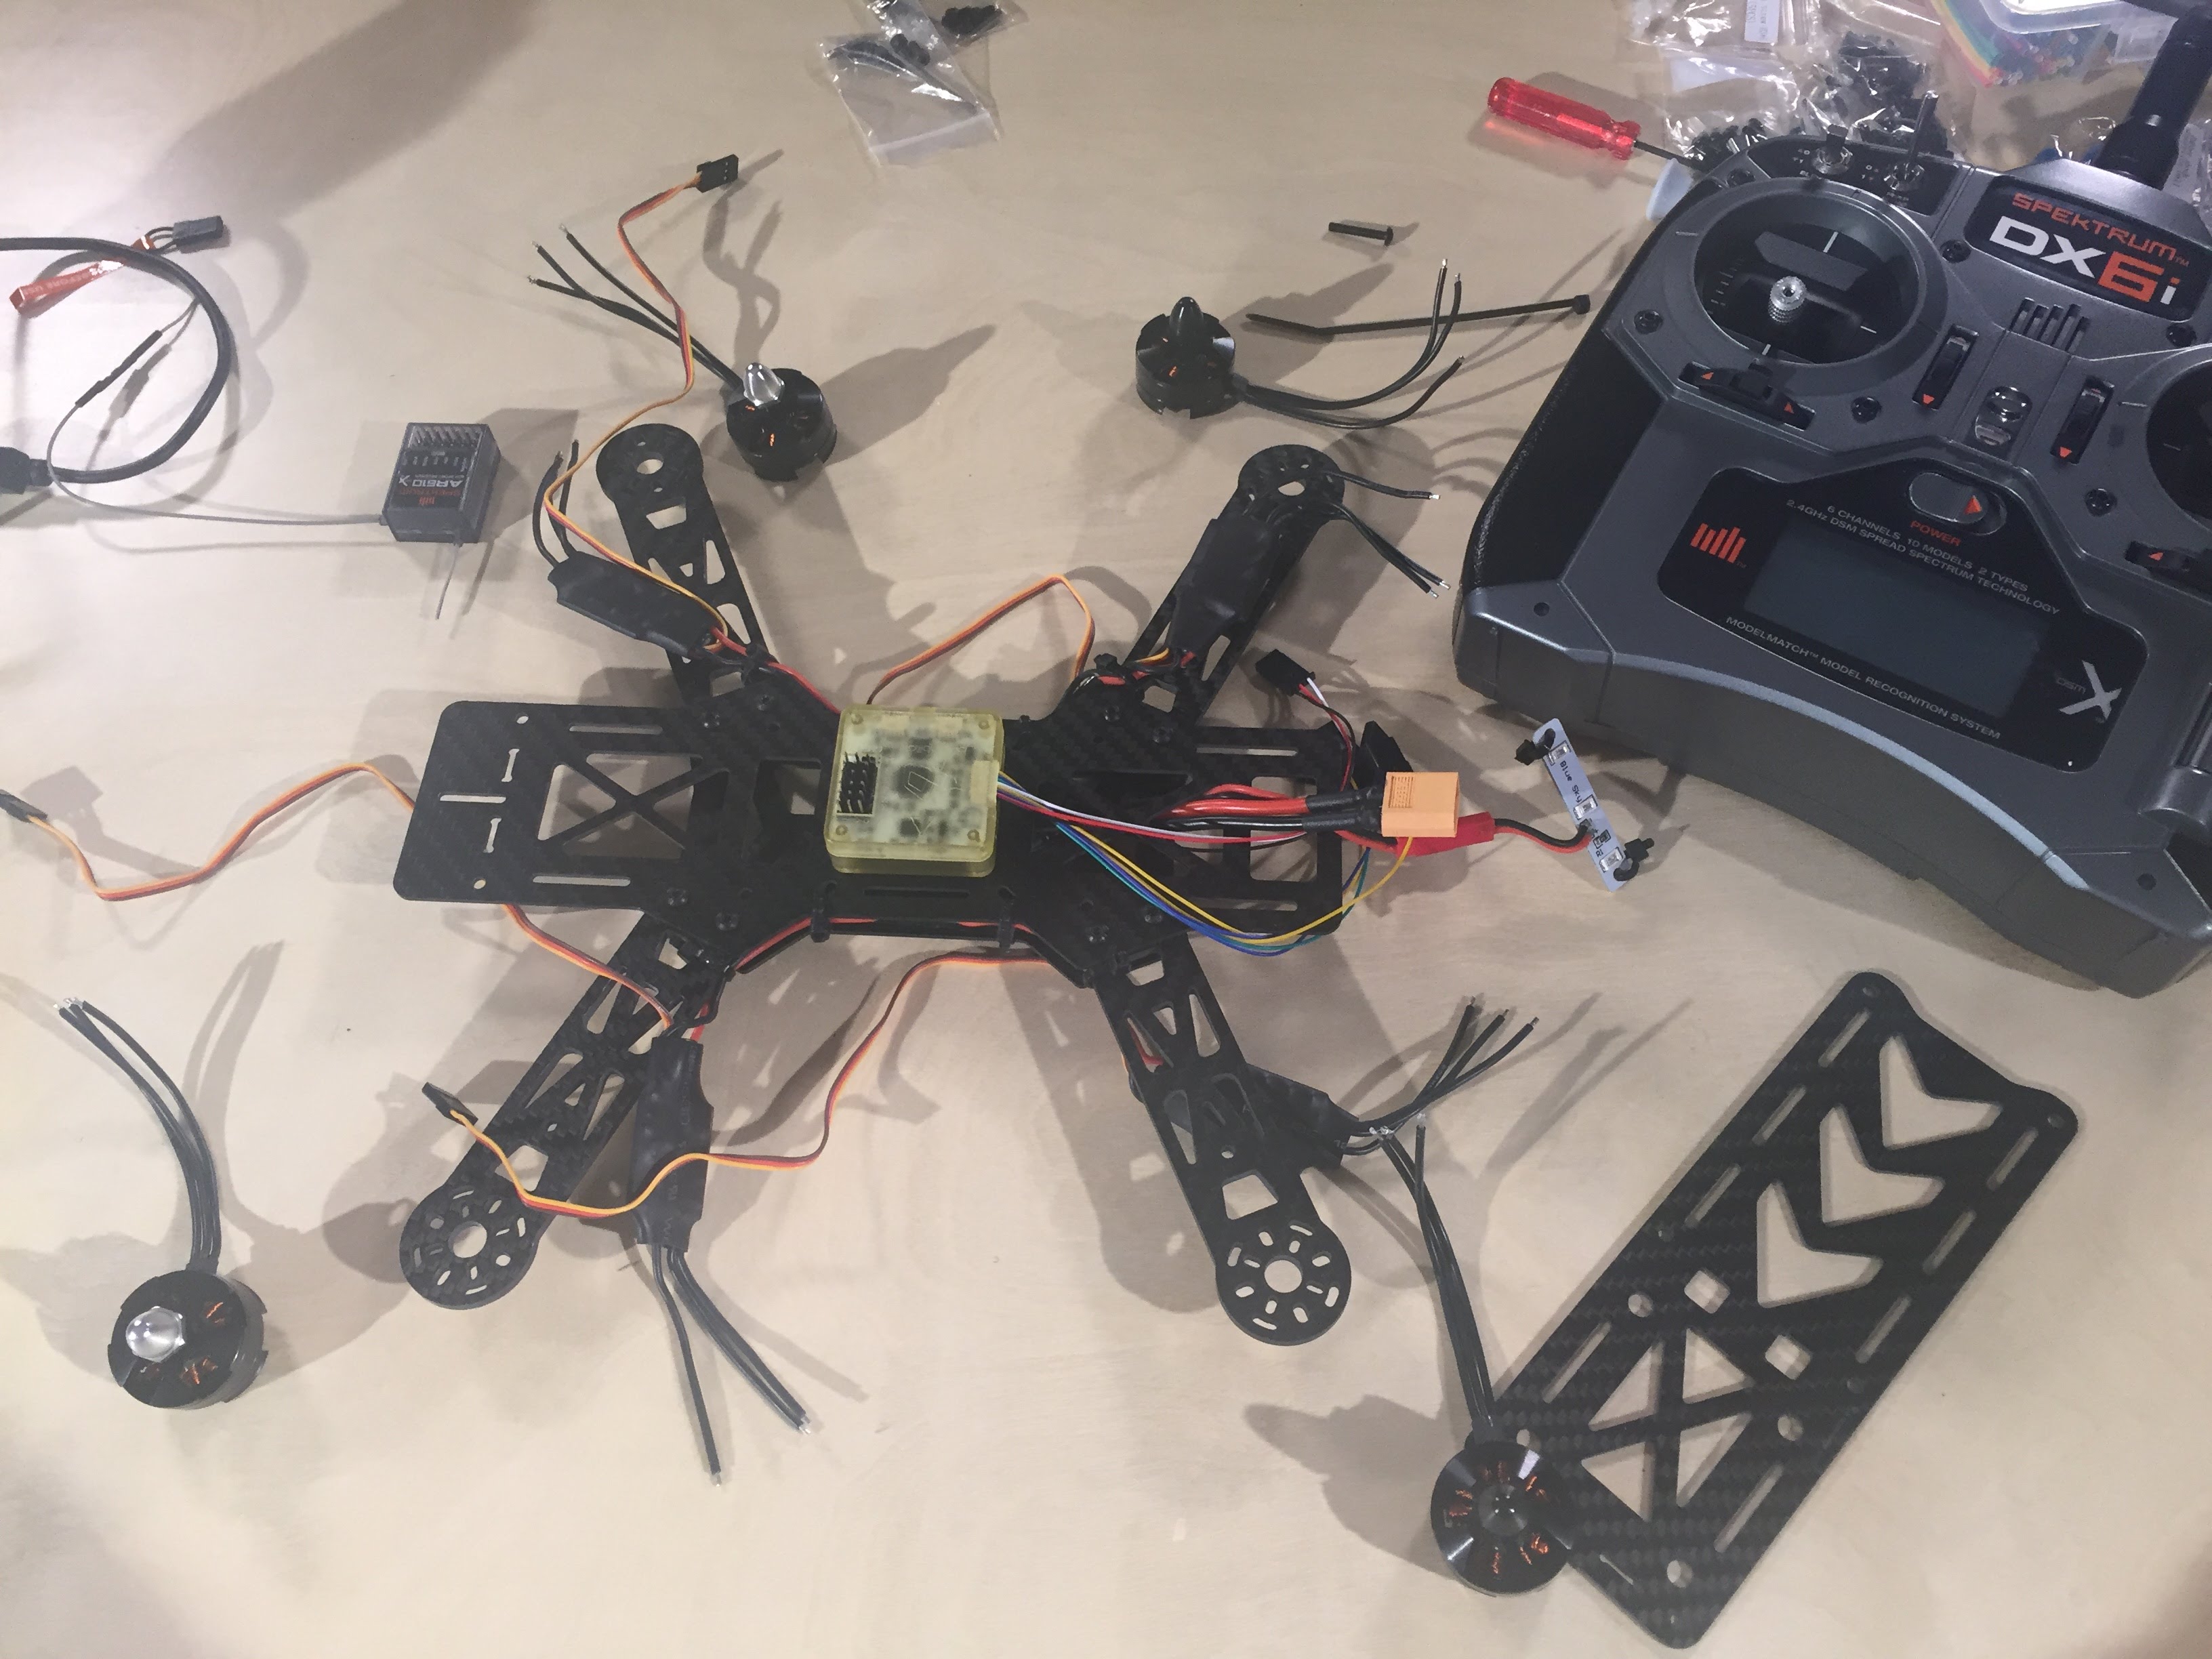 How To Build A FPV Racing Quadcopter Part 2 – The Build